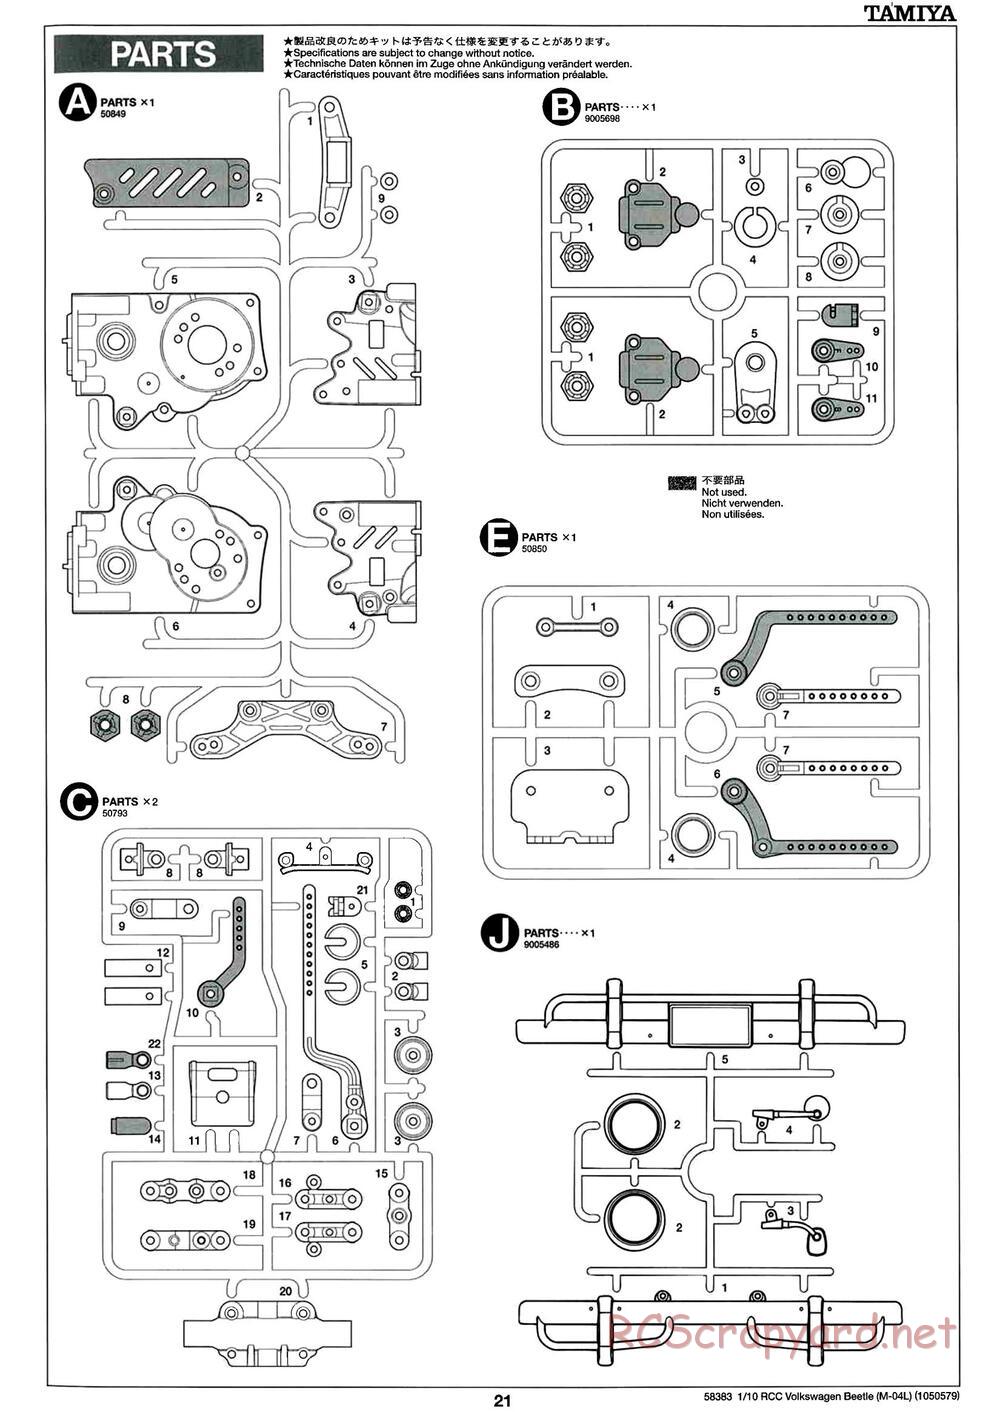 Tamiya - Volkswagen Beetle - M04L Chassis - Manual - Page 21